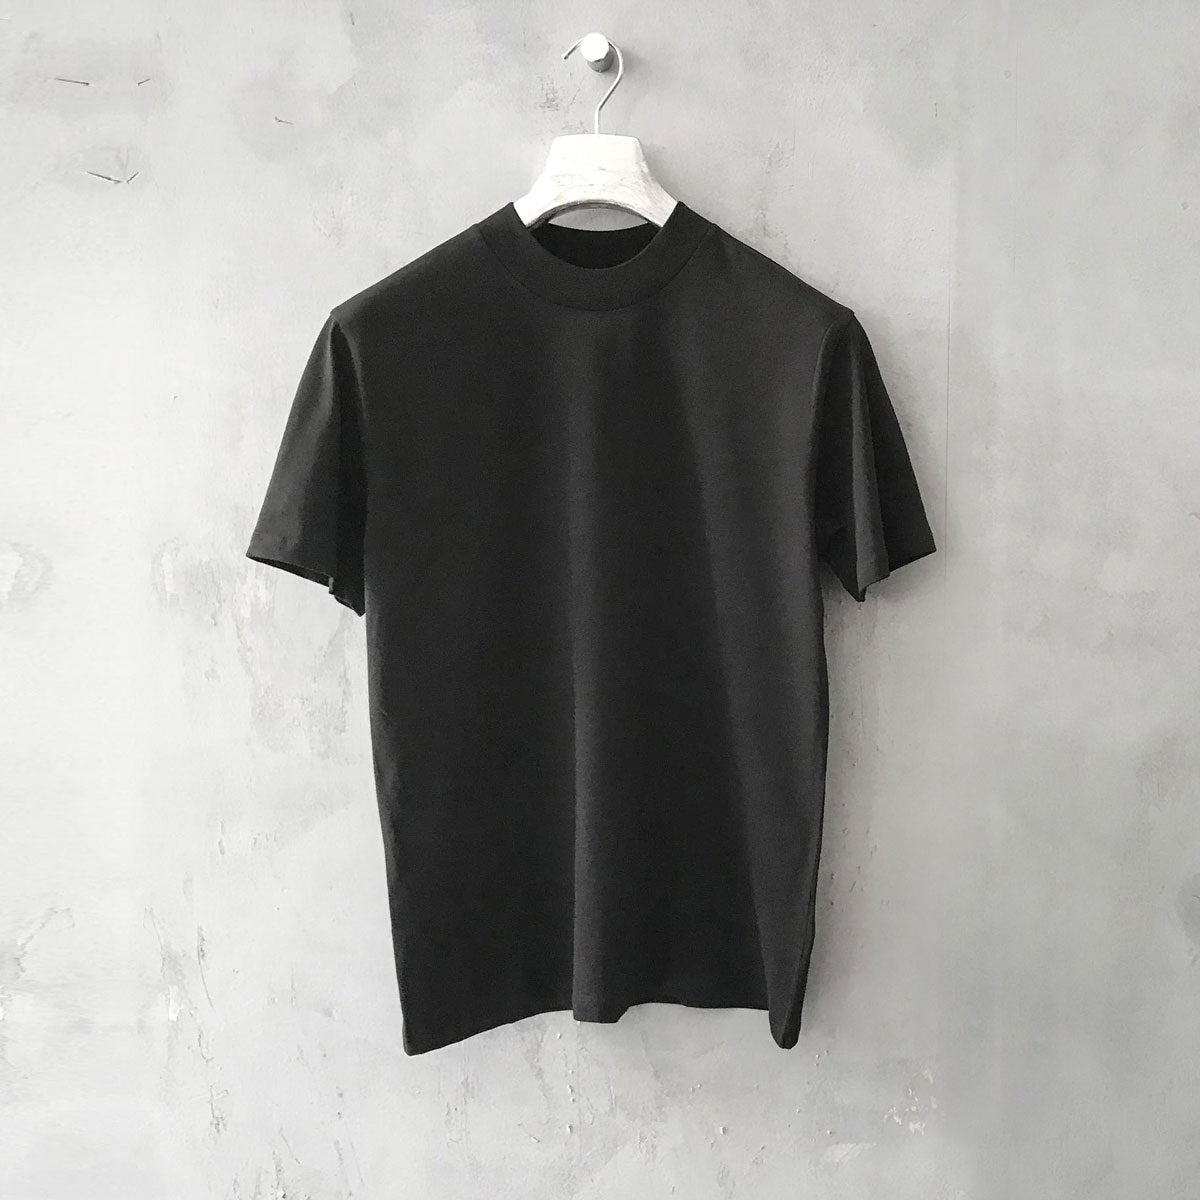 Ljung Heavy Tee Black - Mojo Independent Store